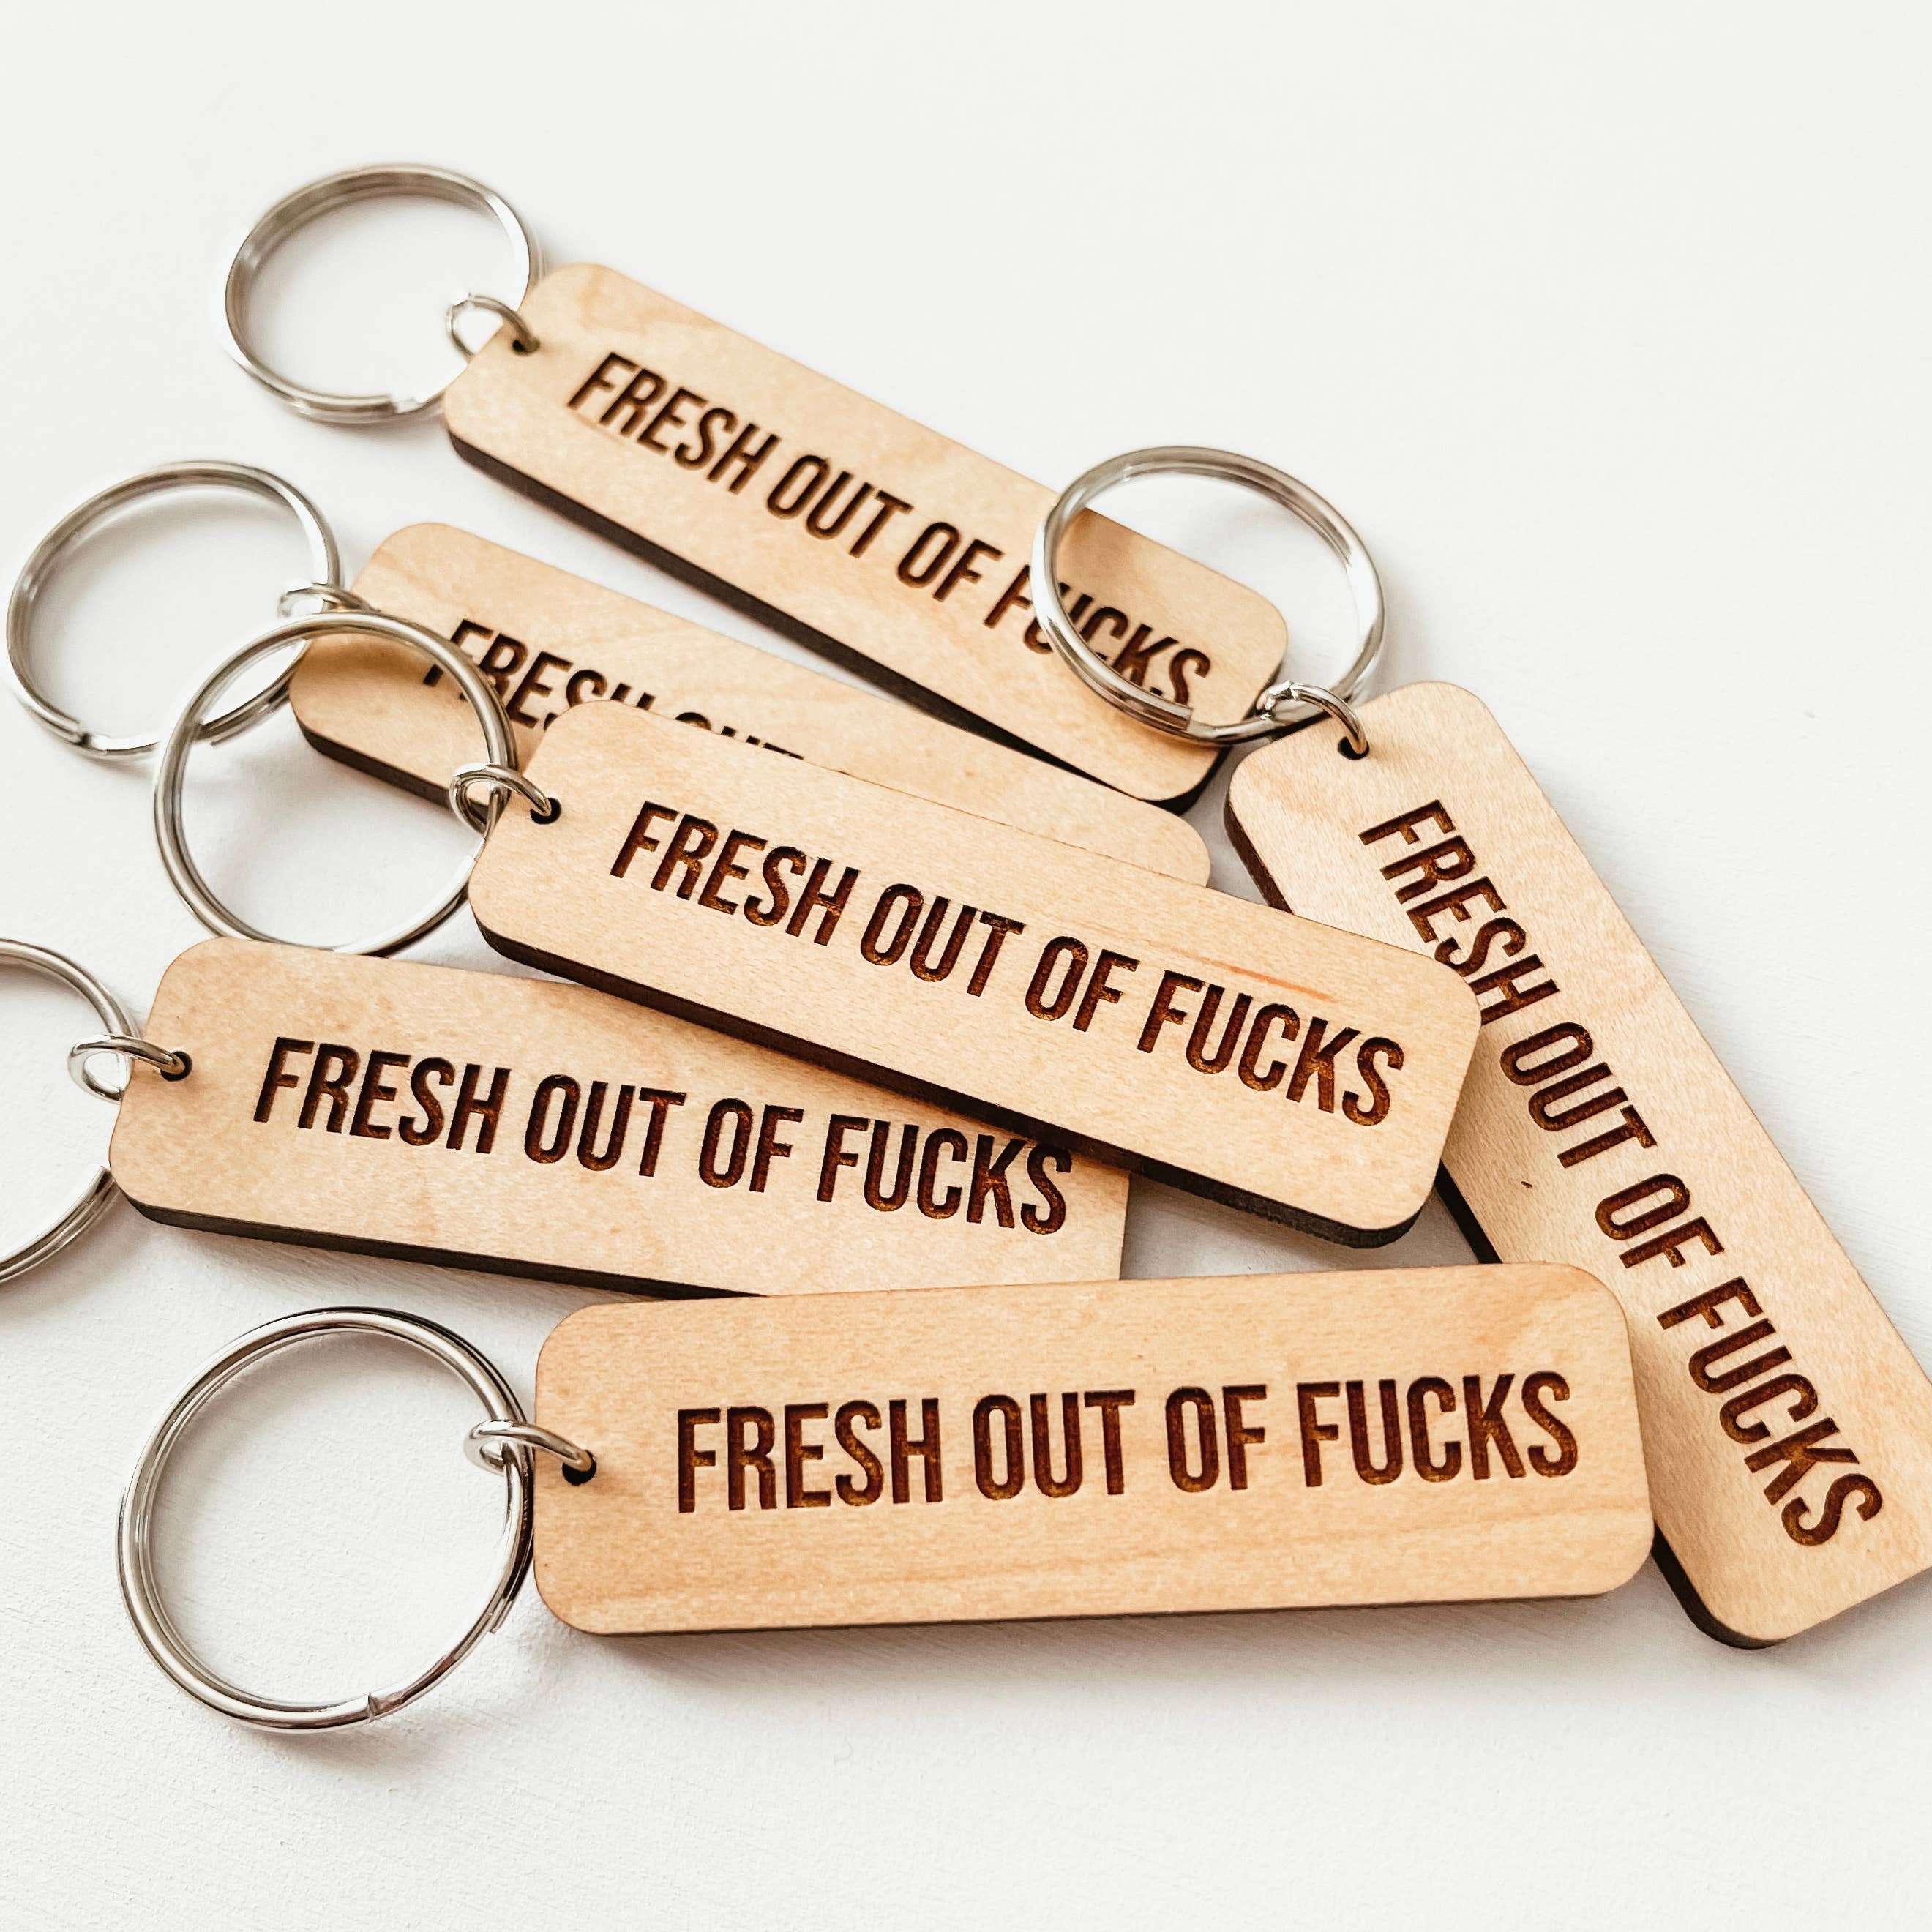 Knotty Design Co. Wooden Key Chain | Fresh Out Of Fucks Knotty Design Co. - Oscar & Libby's